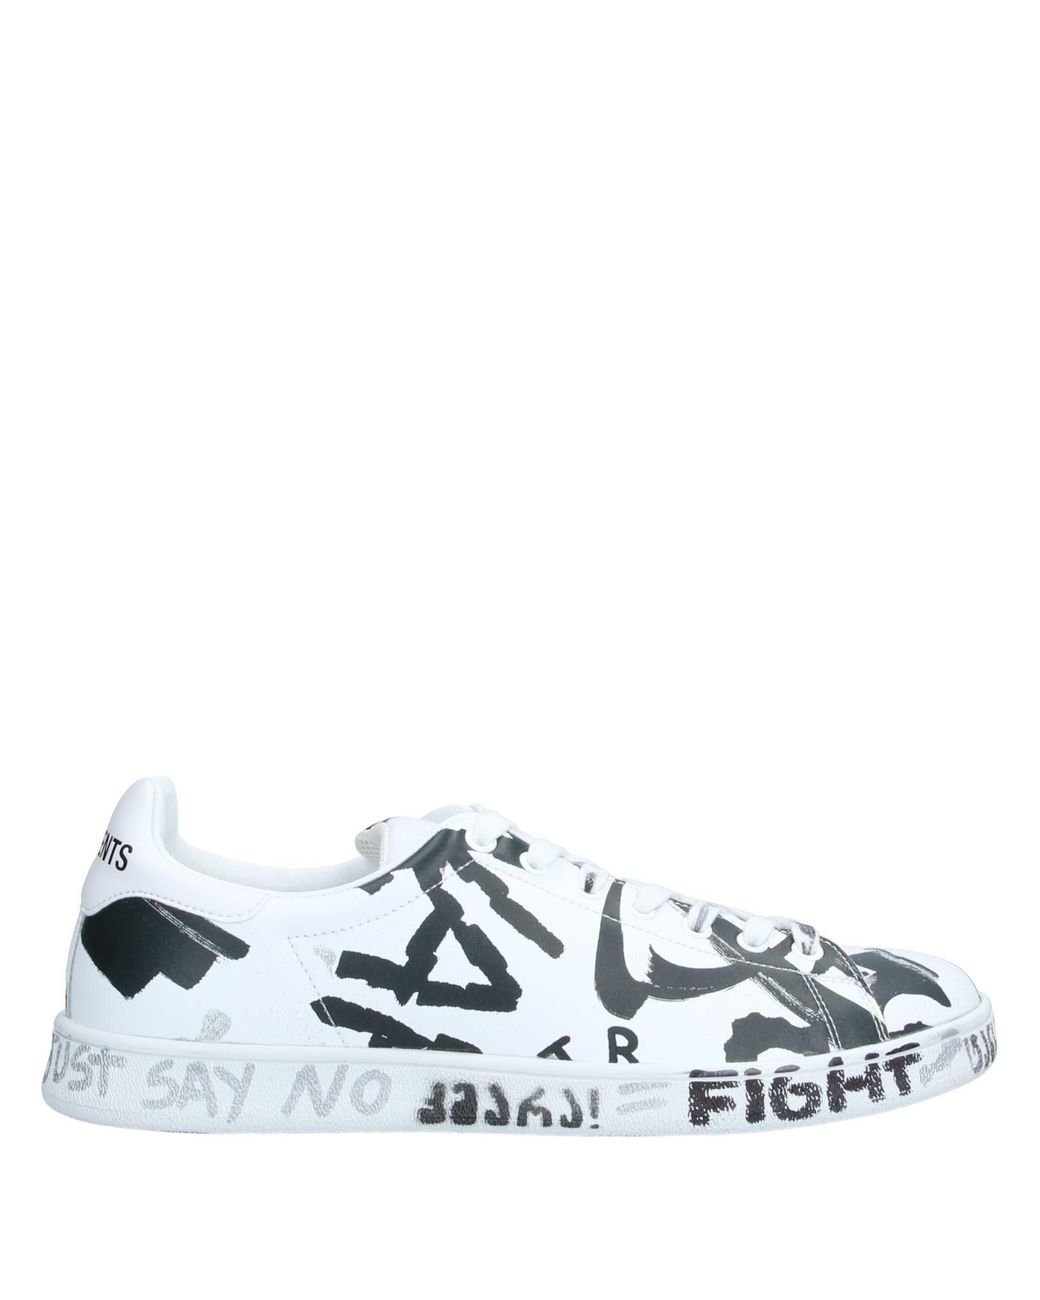 Vetements Leather Low-tops & Sneakers in White for Men - Lyst